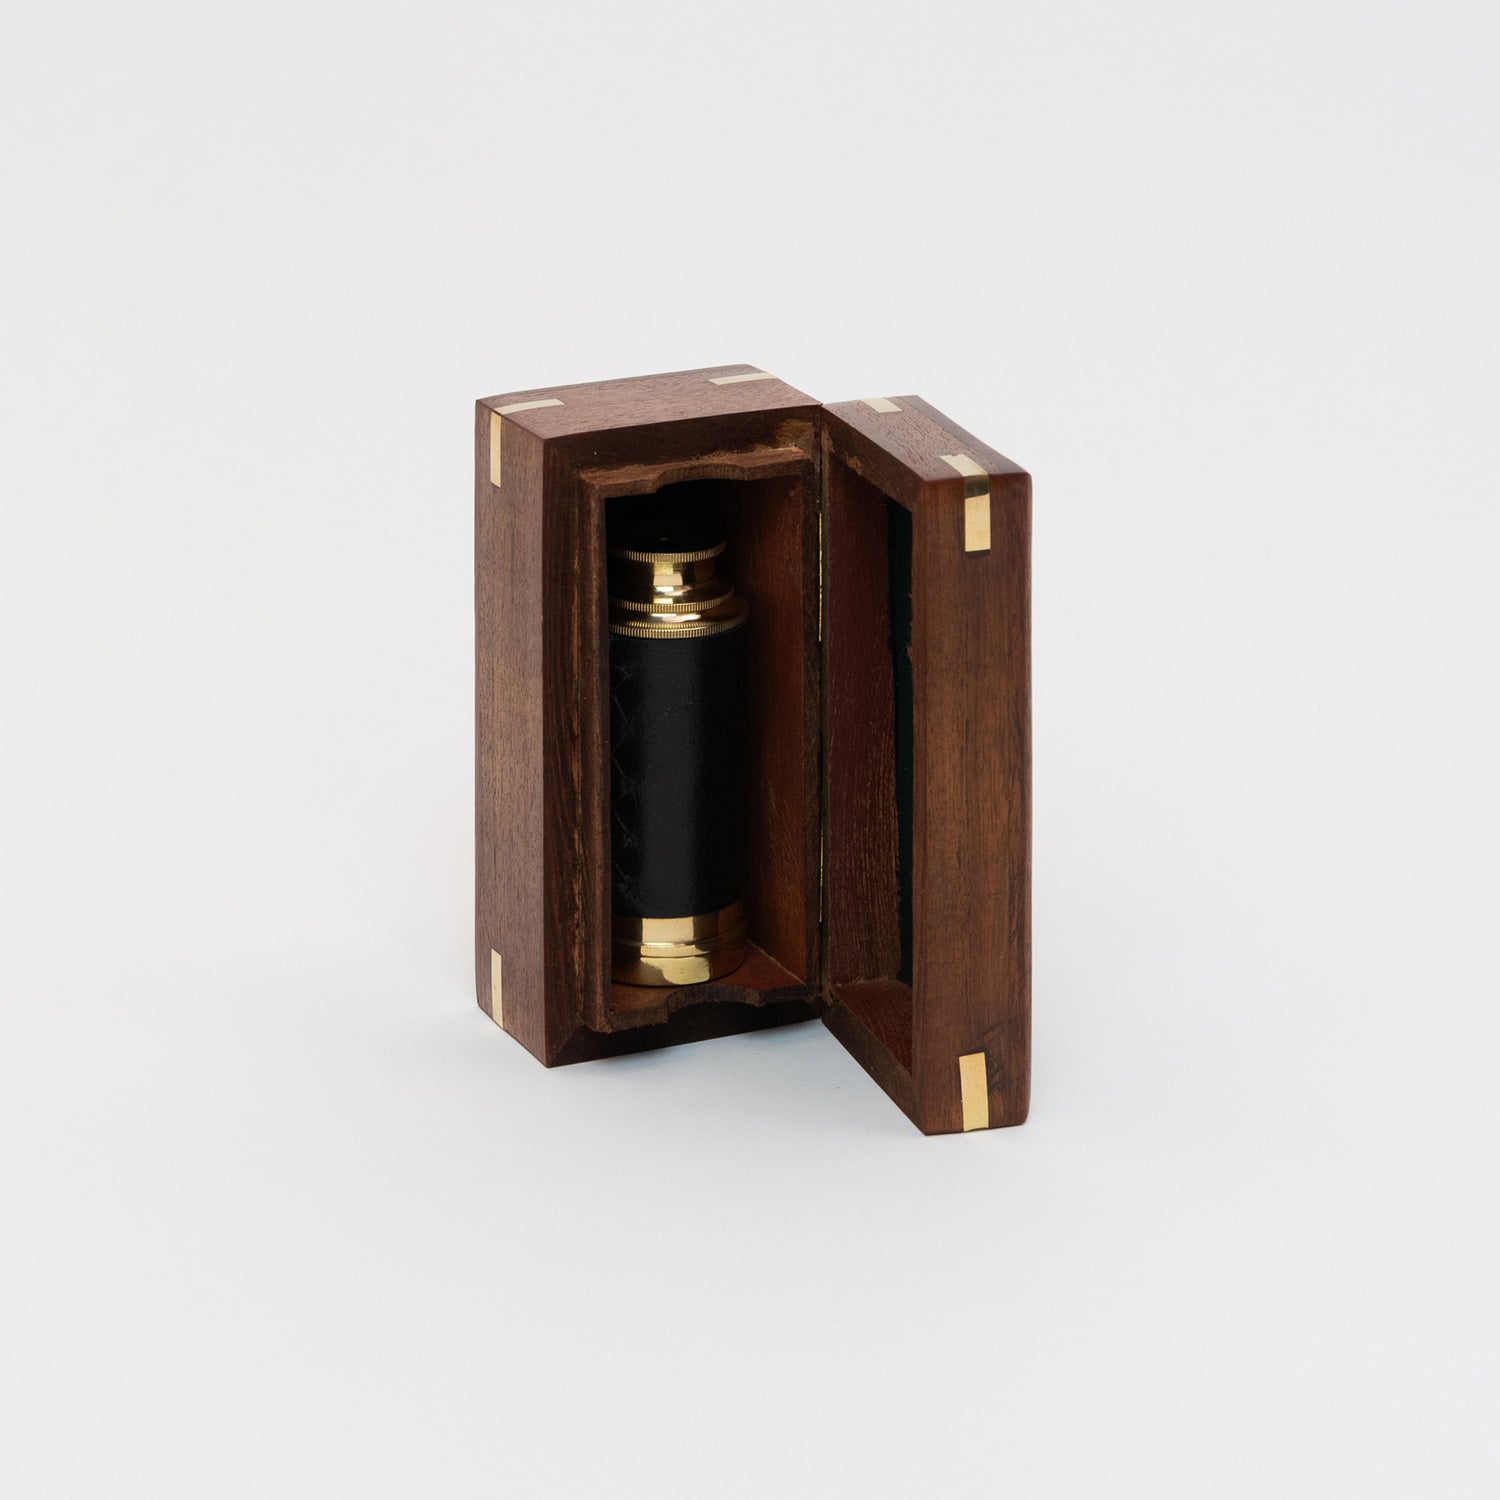 A photo of a brass pocket telescope inside a wooden box. Pictured on a white background.